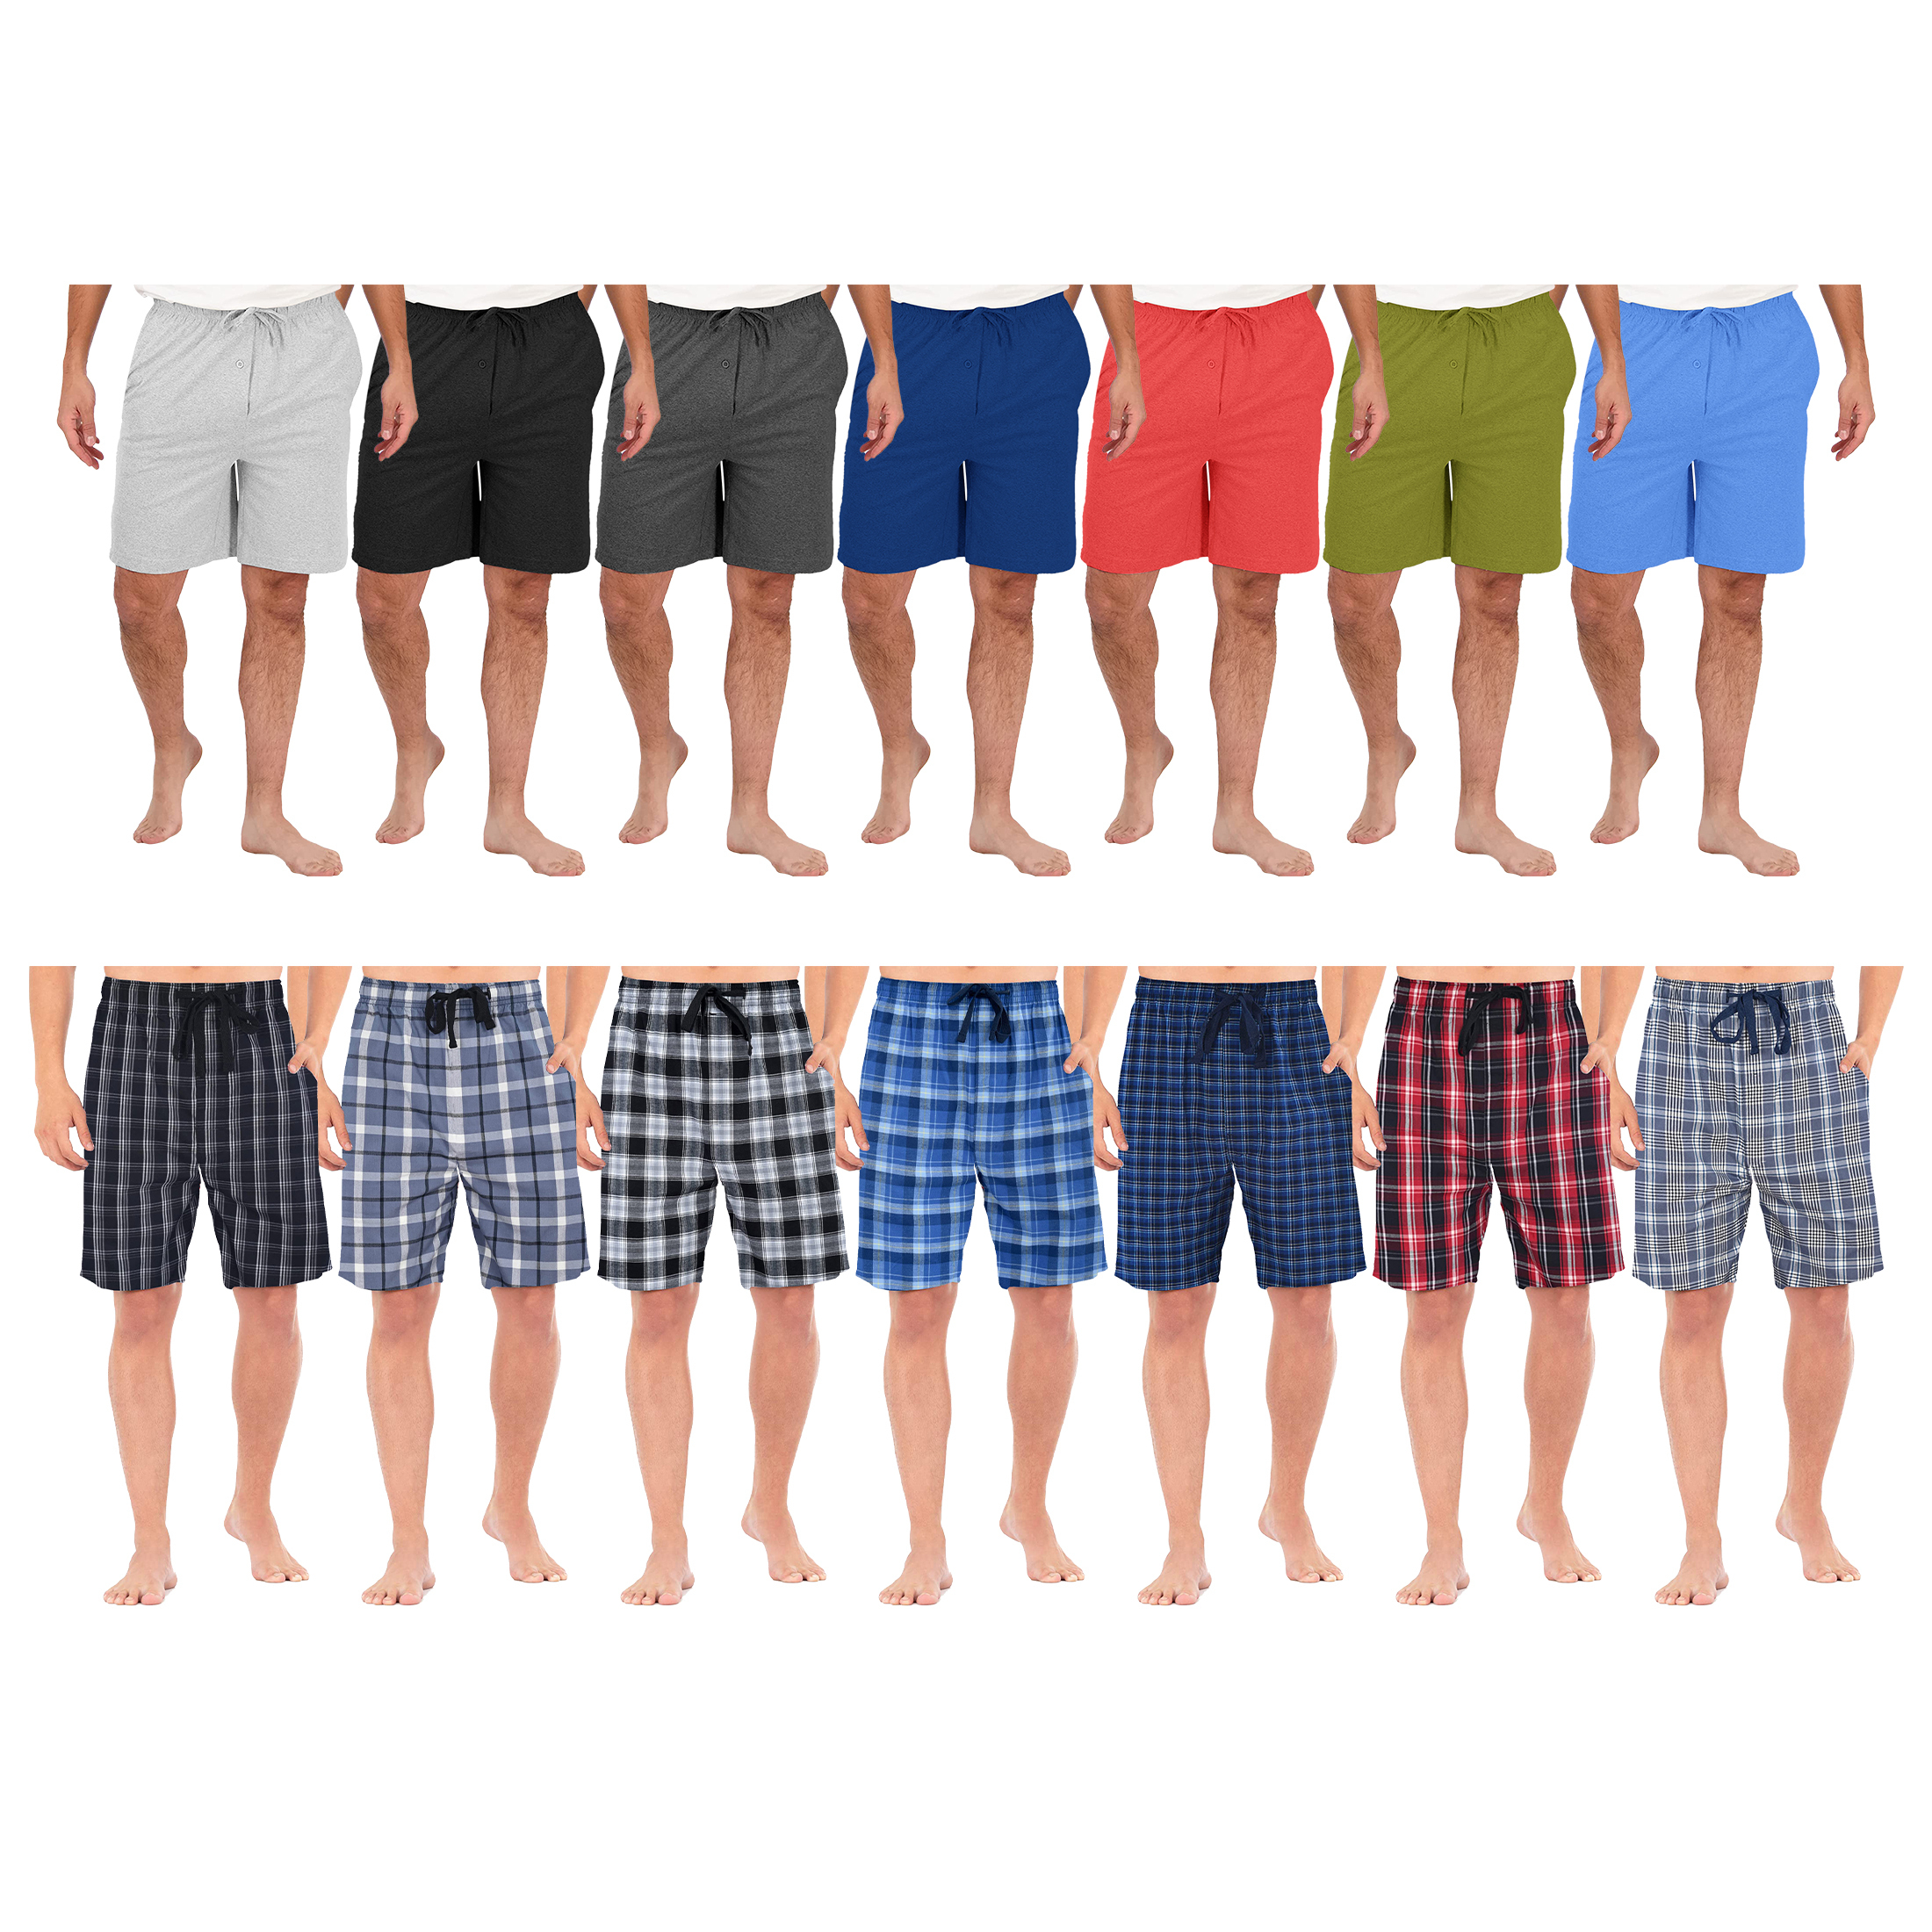 Multi-Pack: Men's Ultra-Soft Jersey Knit Sleep Lounge Pajama Shorts For Sleepwear - Solid, 3 Pack, Large